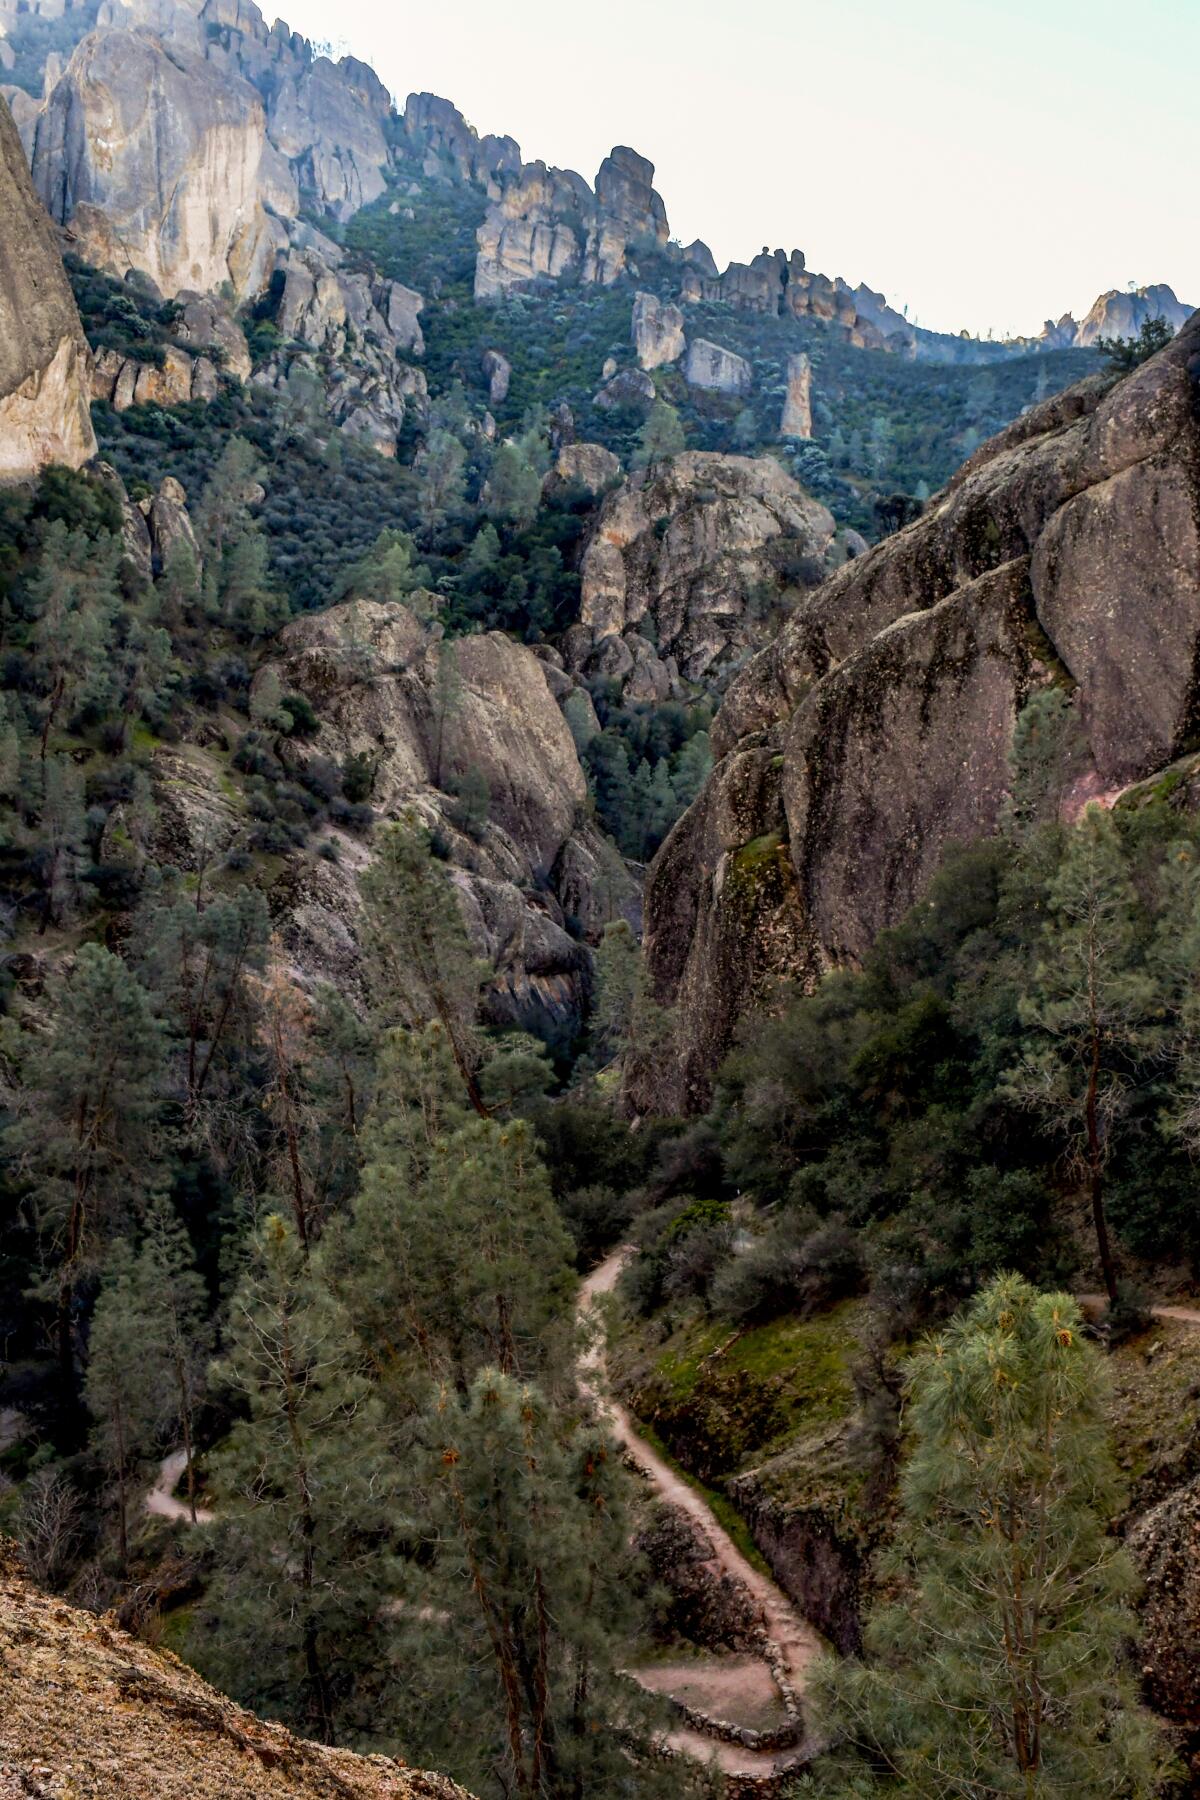 An elevated view of the Pinnacles National Park landscape